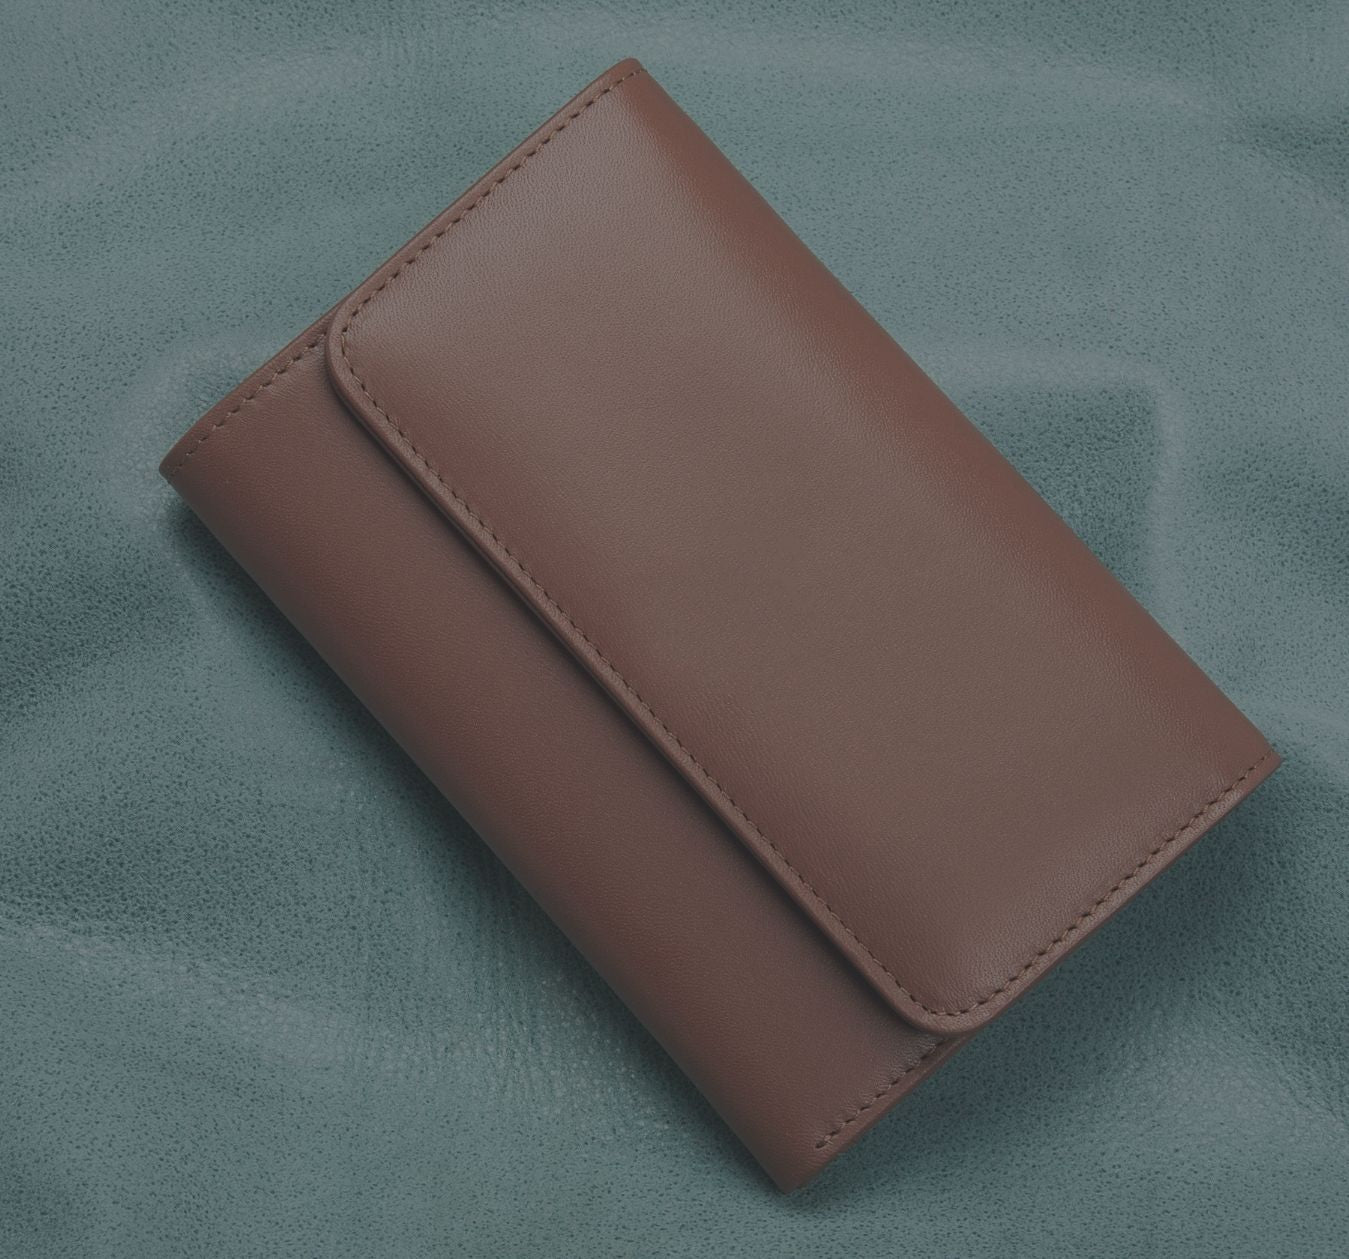 Personalised Wallets and Leather Care: Tips for Long-Lasting Personalised Products